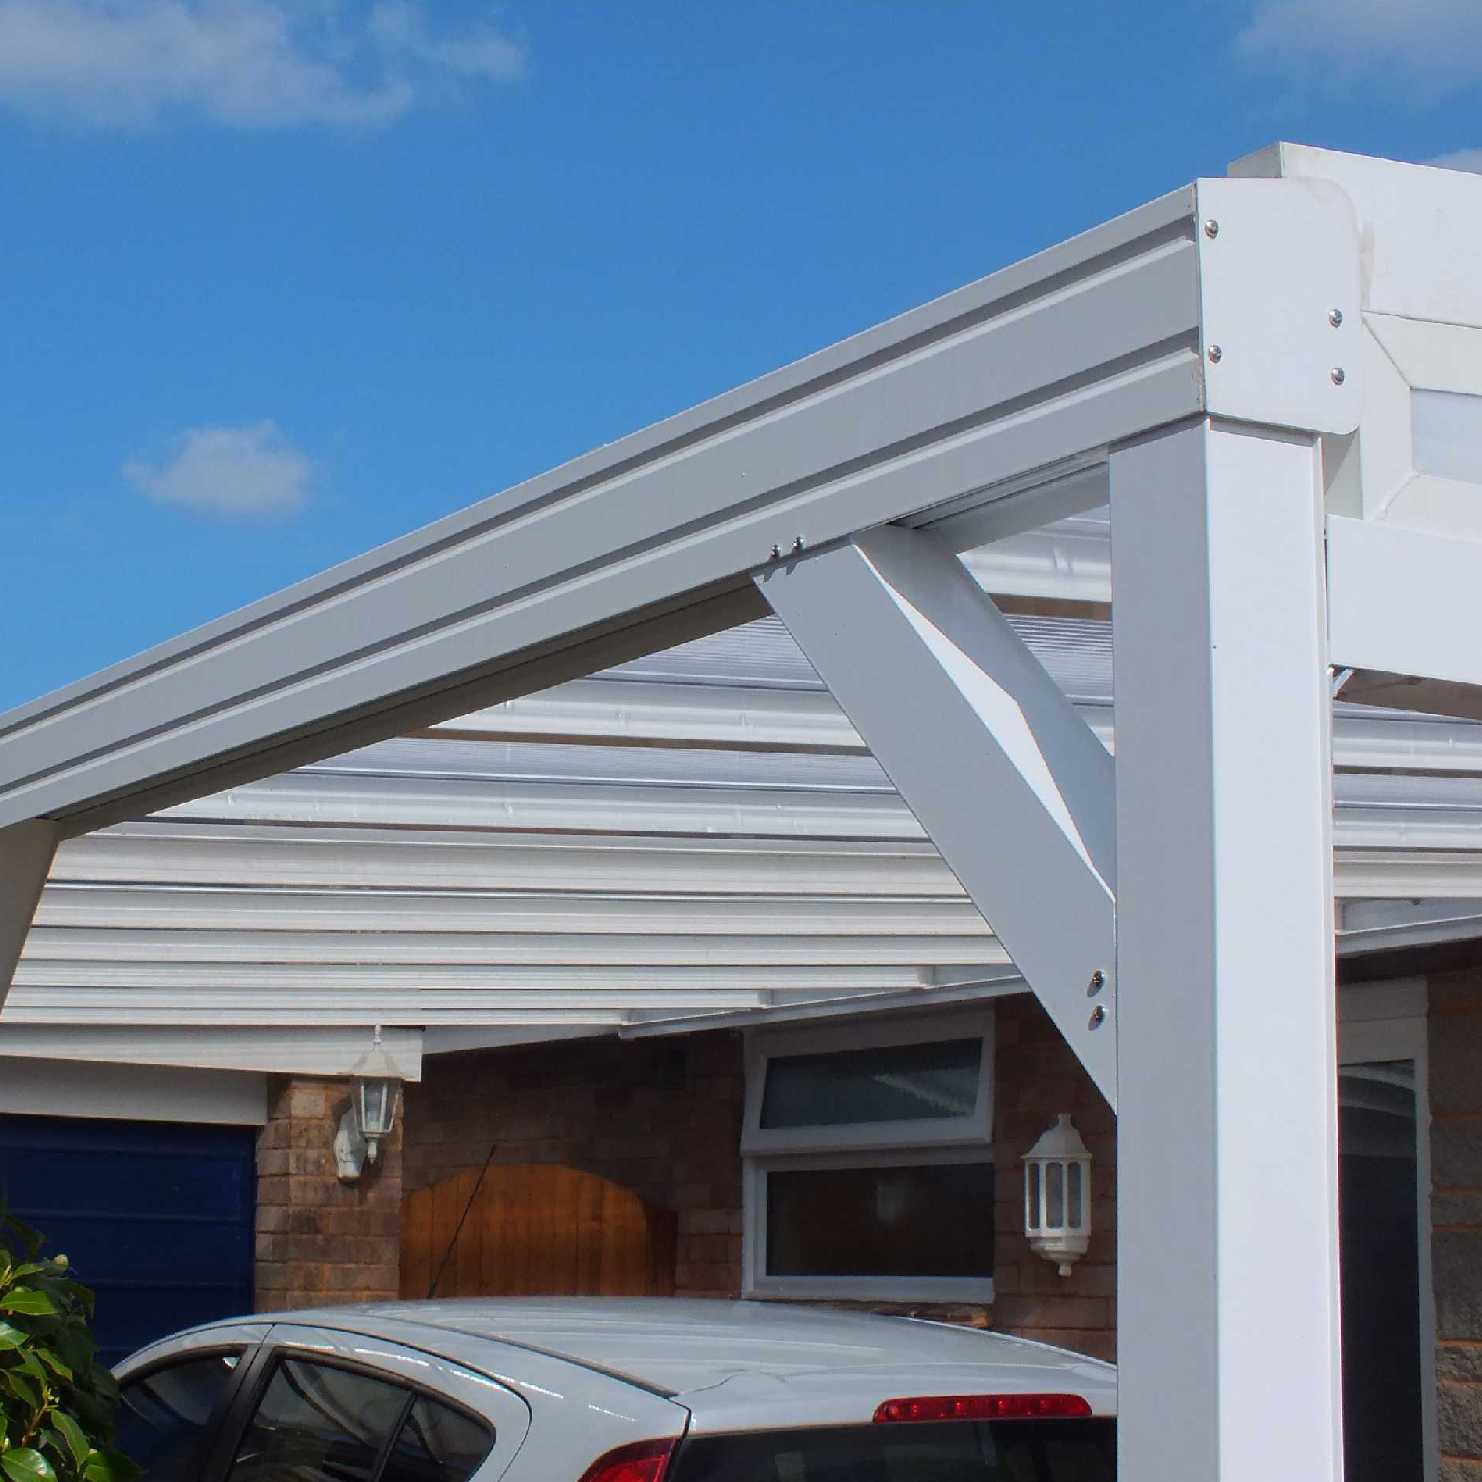 Great deals on Omega Smart Lean-To Canopy, White with 16mm Polycarbonate Glazing - 3.1m (W) x 4.5m (P), (2) Supporting Posts